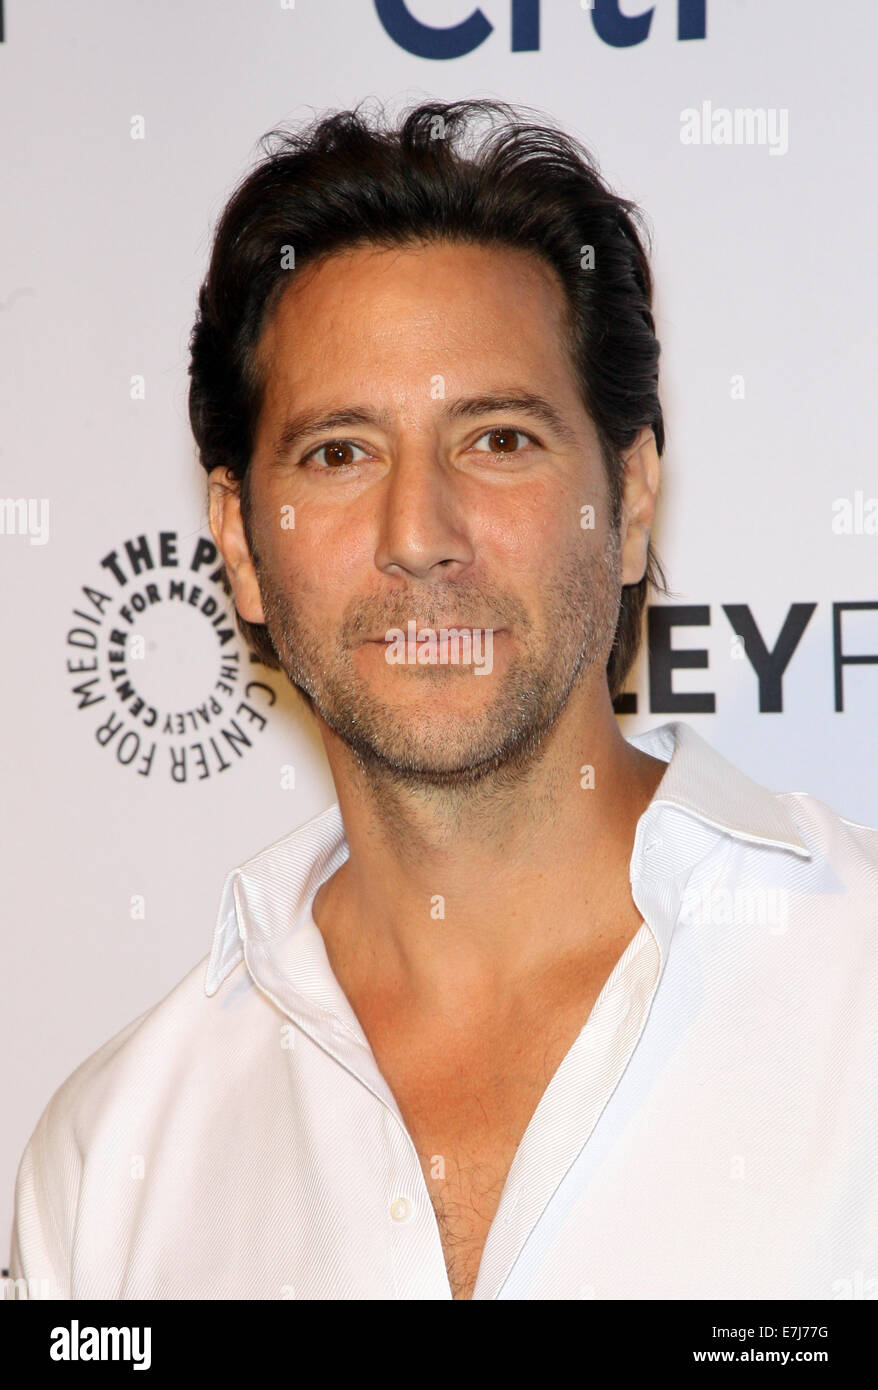 2014 PaleyFest - 'Lost' 10th Anniversary Reunion At Dolby Theatre  Featuring: Henry Ian Cusick Where: Hollywood, California, United States When: 17 Mar 2014 Stock Photo